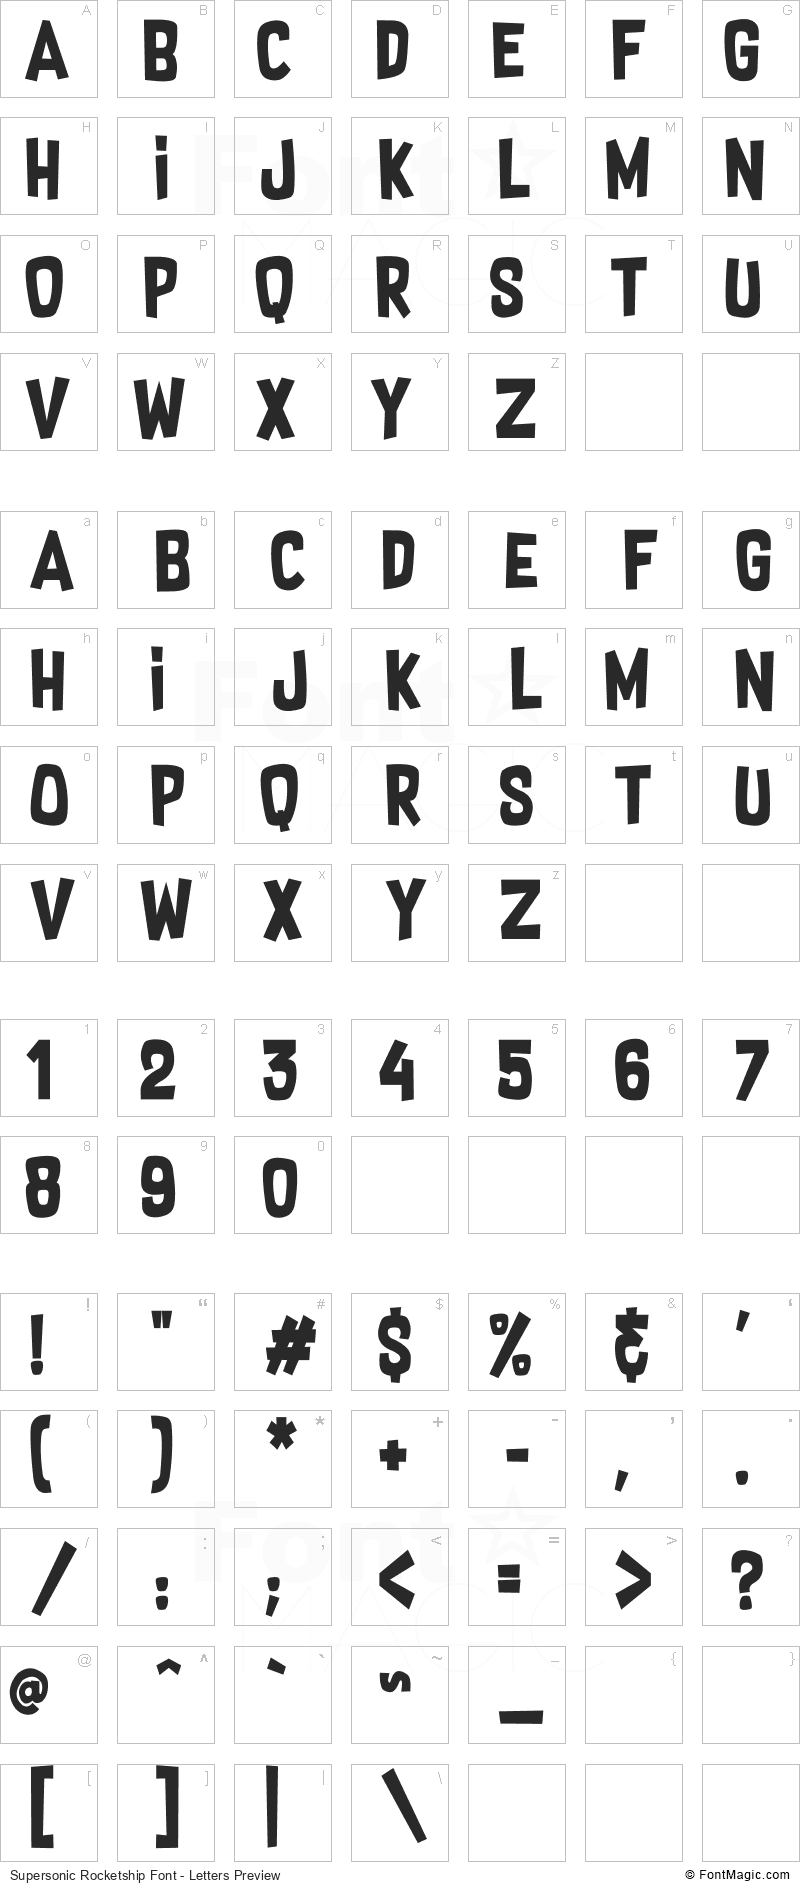 Supersonic Rocketship Font - All Latters Preview Chart